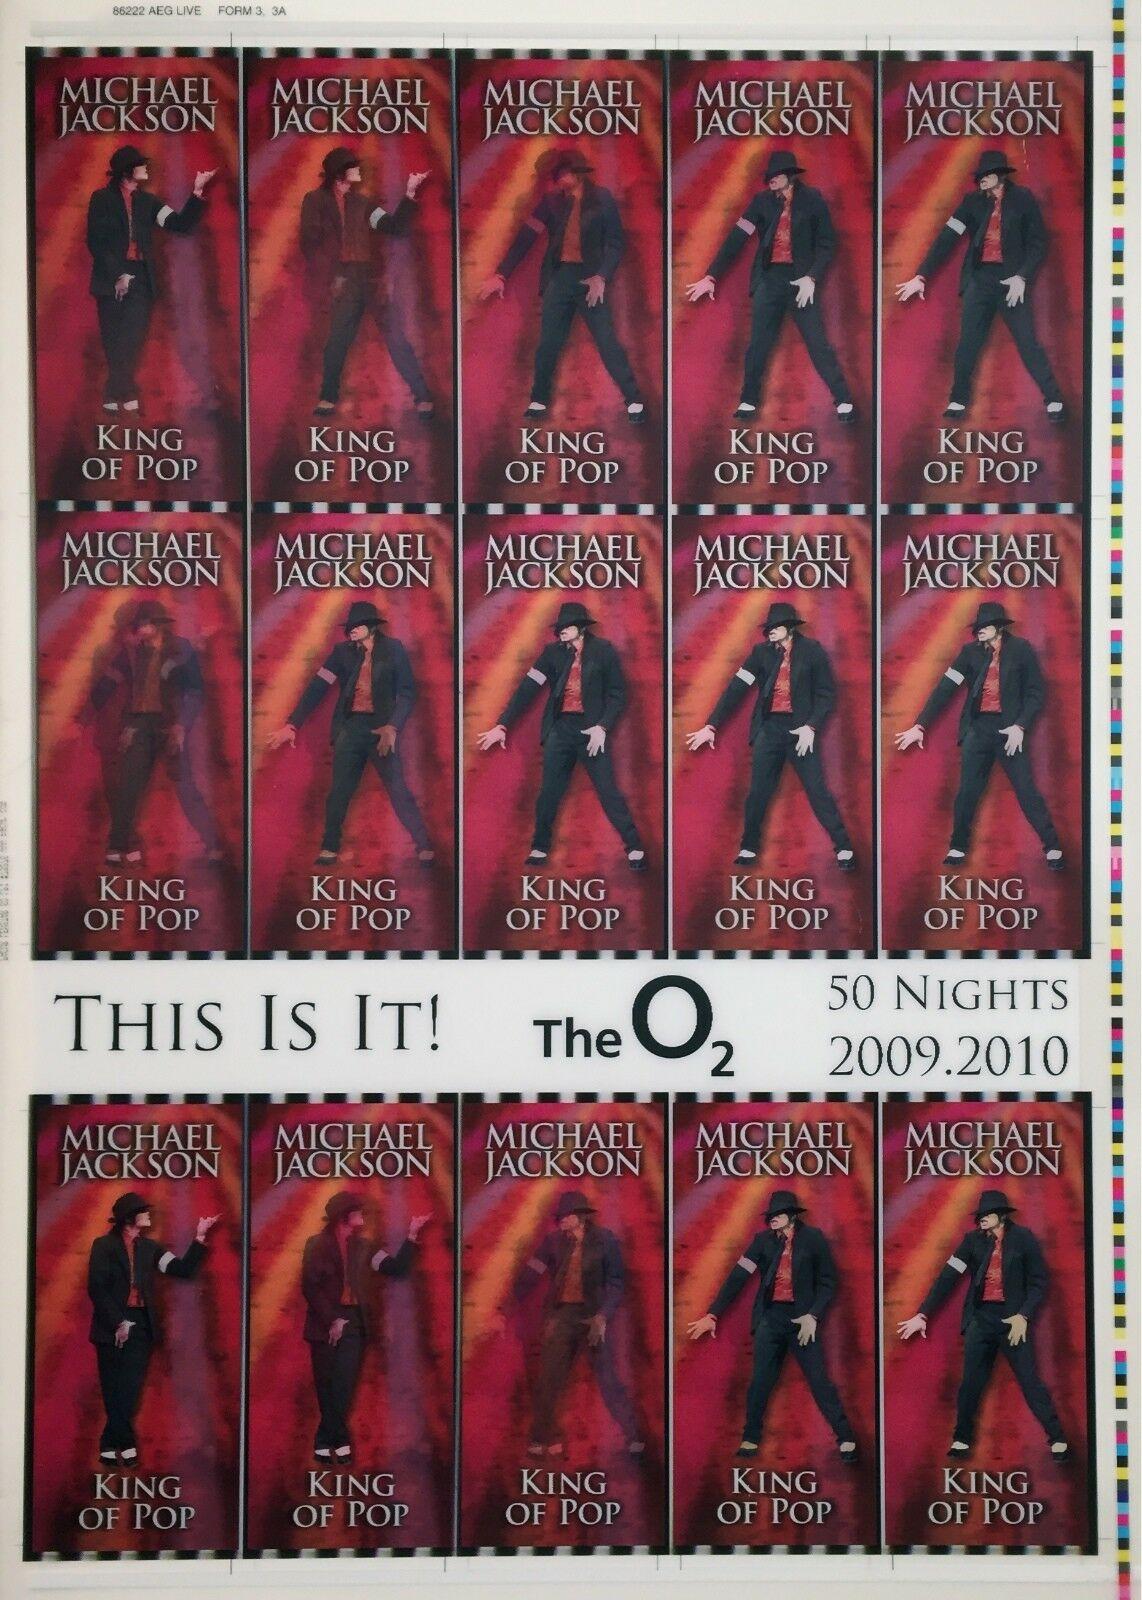 Artist: Michael Jackson (1958-2009)
Title: This Is It! Uncut 2009 Lenticular Concert Ticket Sheet Form 3,3A Michael Jackson
Year: 2009
Medium: Lenticular Printing on vinyl
Size: 28 x 20 inches
Condition: Excellent
Notes: Original Uncut 2009